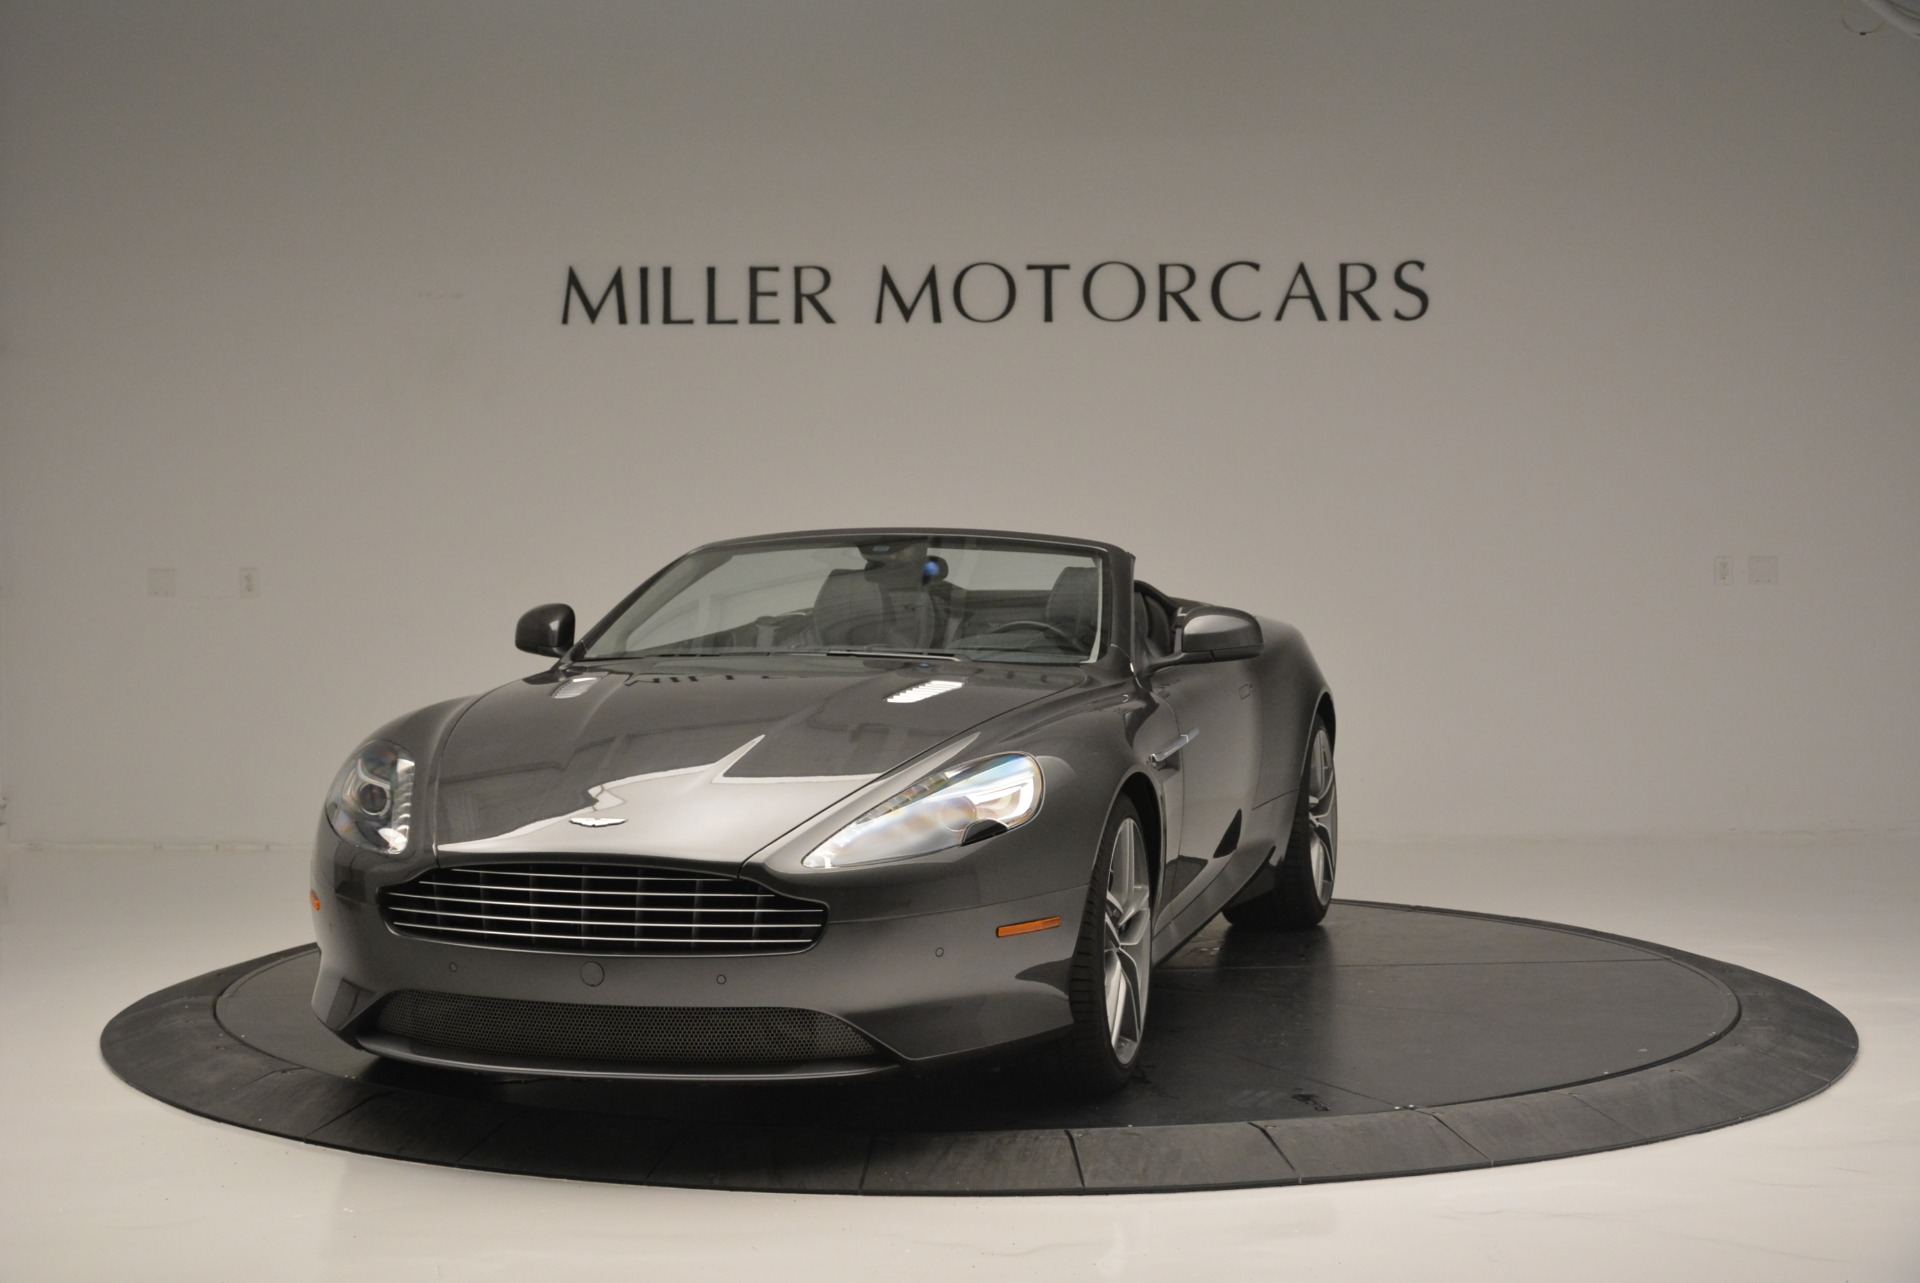 Used 2014 Aston Martin DB9 Volante for sale Sold at Bentley Greenwich in Greenwich CT 06830 1